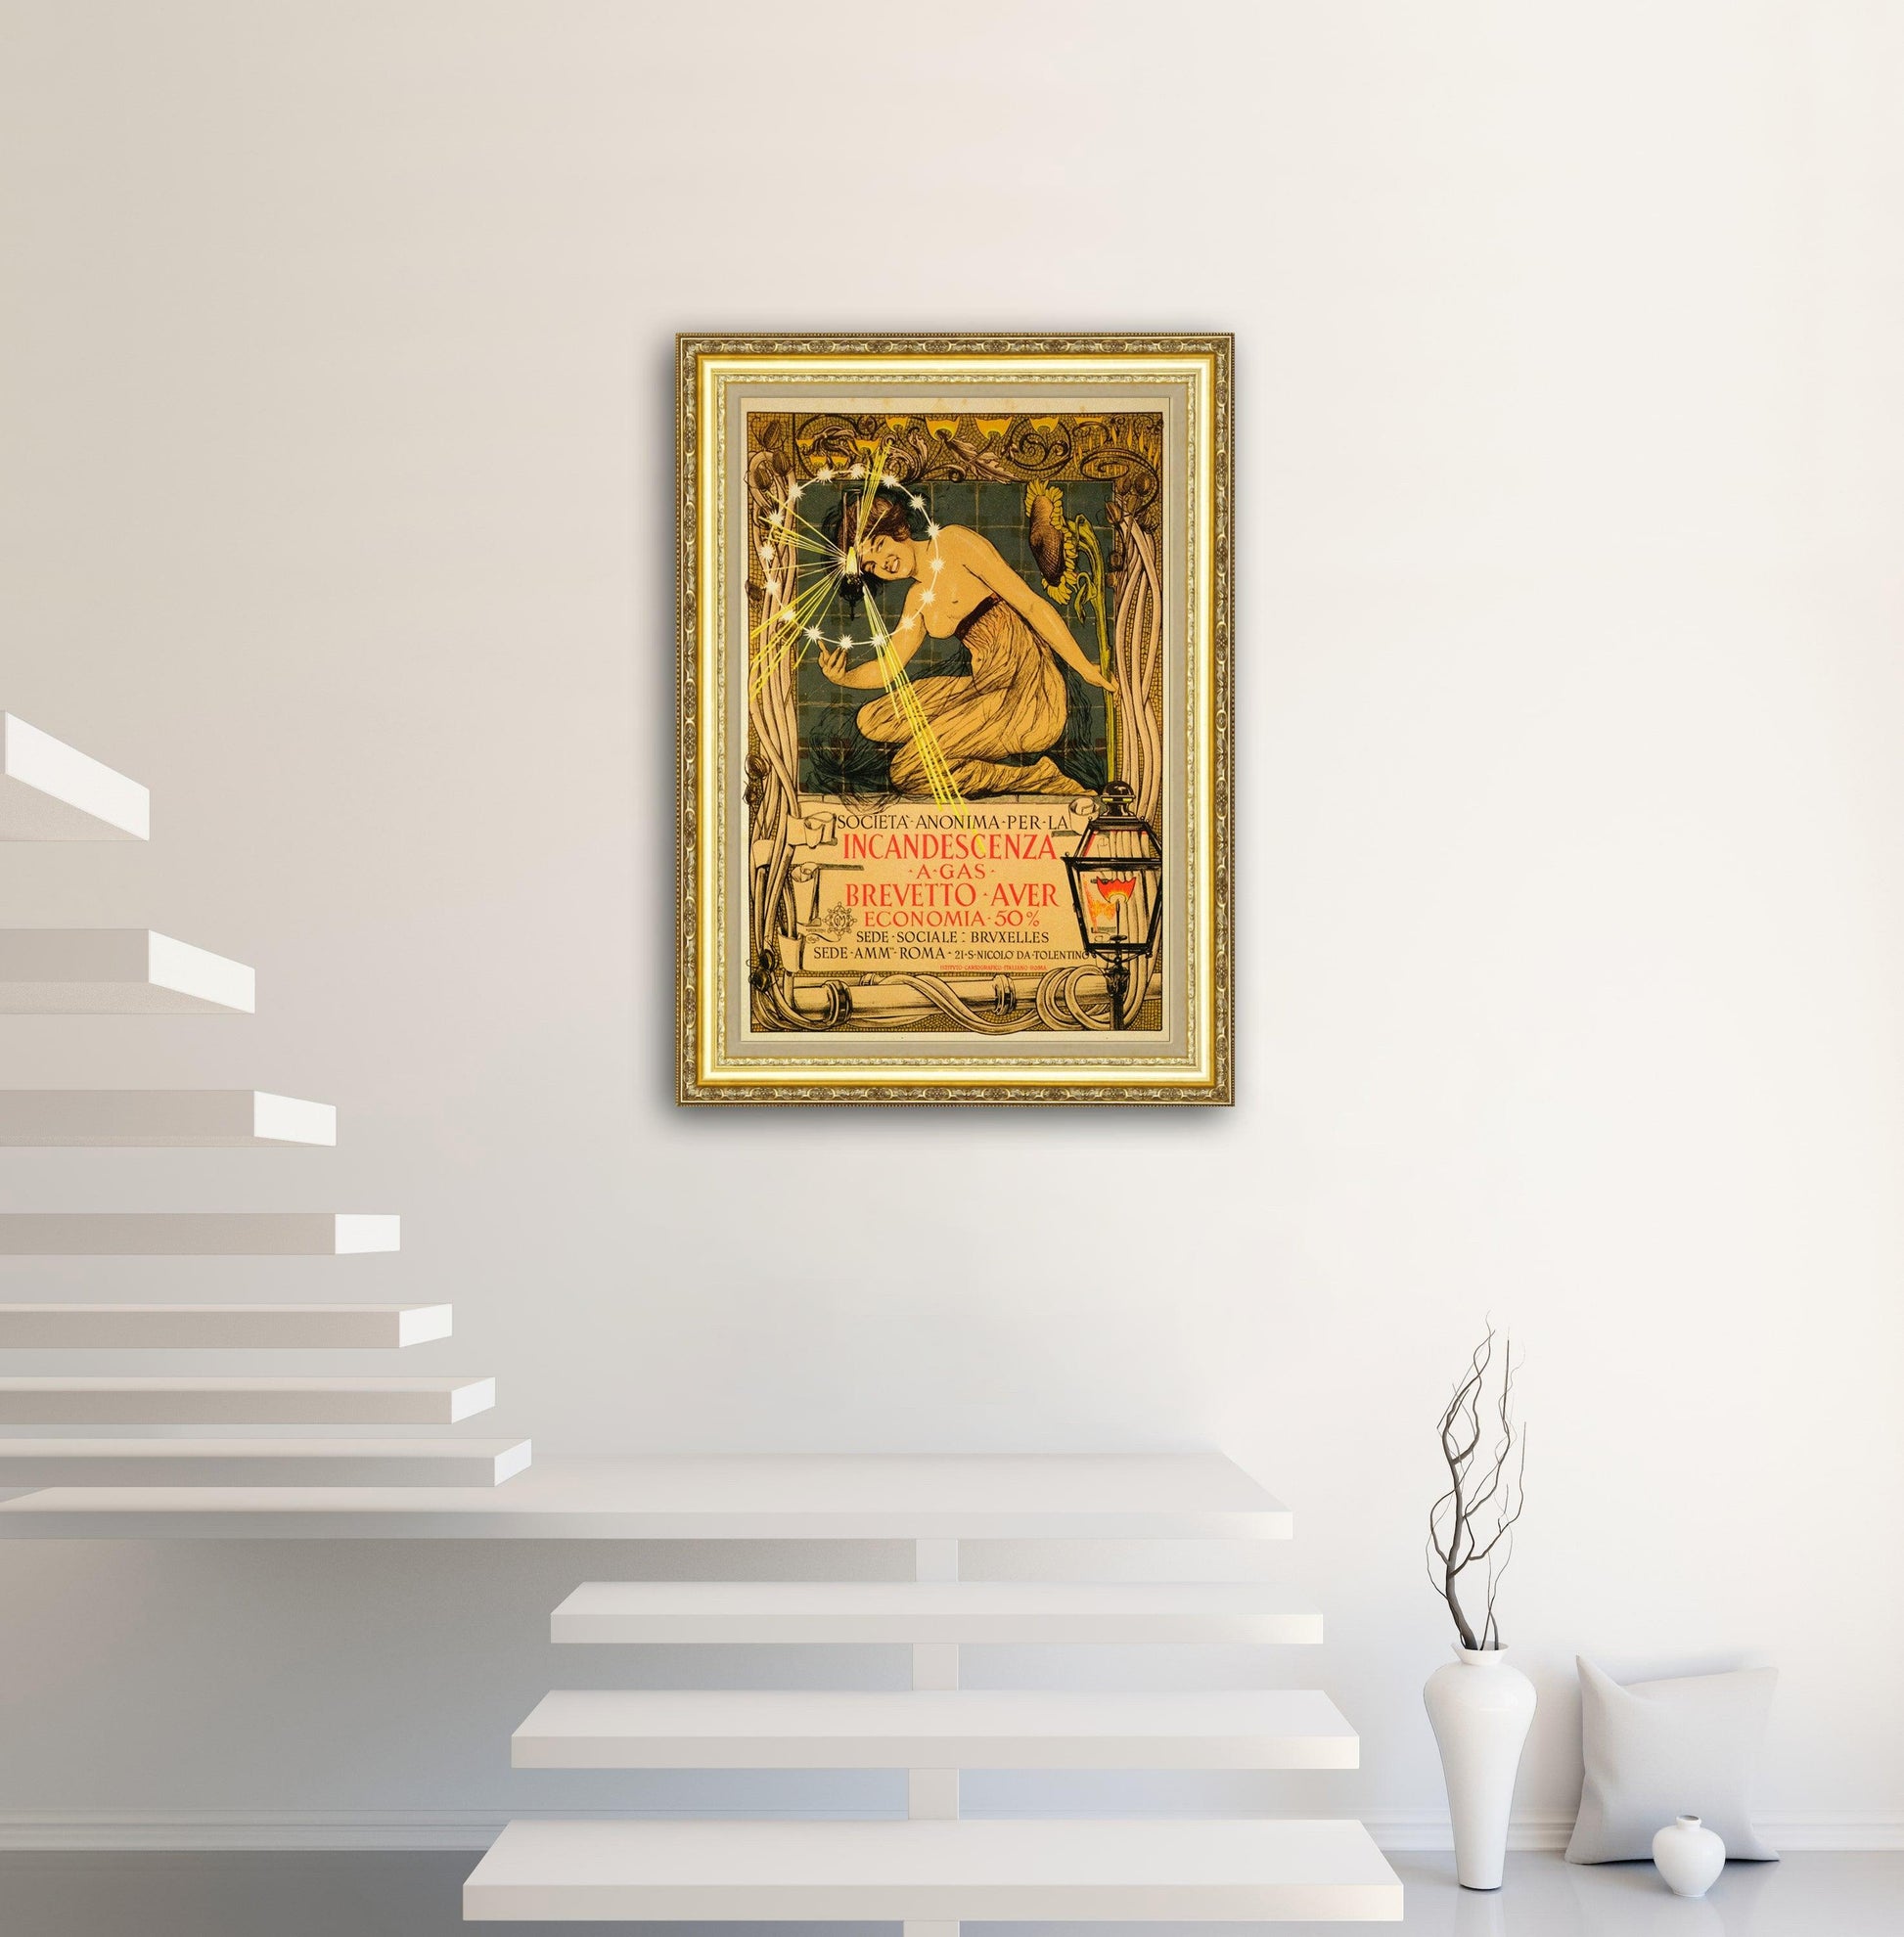 Give your home decor a touch of elegance through our exquisite Society For Gas Illumination reproduction poster. The artwork is a collage with the advertisements poster by Grasset created by Giovanni Maria Mataloni (Italian graphic designer, 1869-1944). The year of creation is 1895.